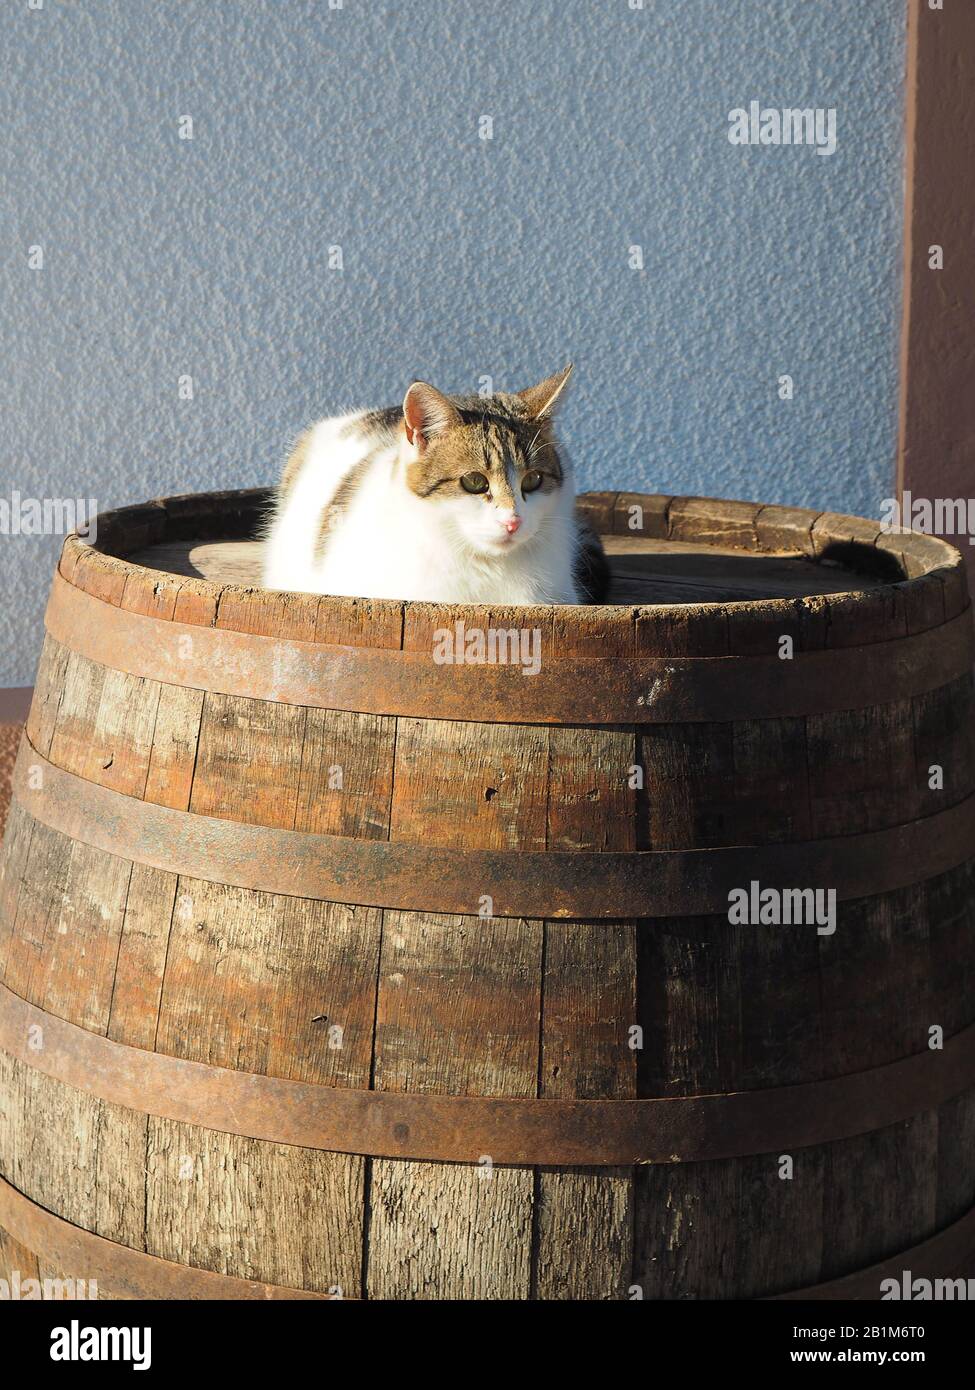 Cat on the old wooden barrel Stock Photo